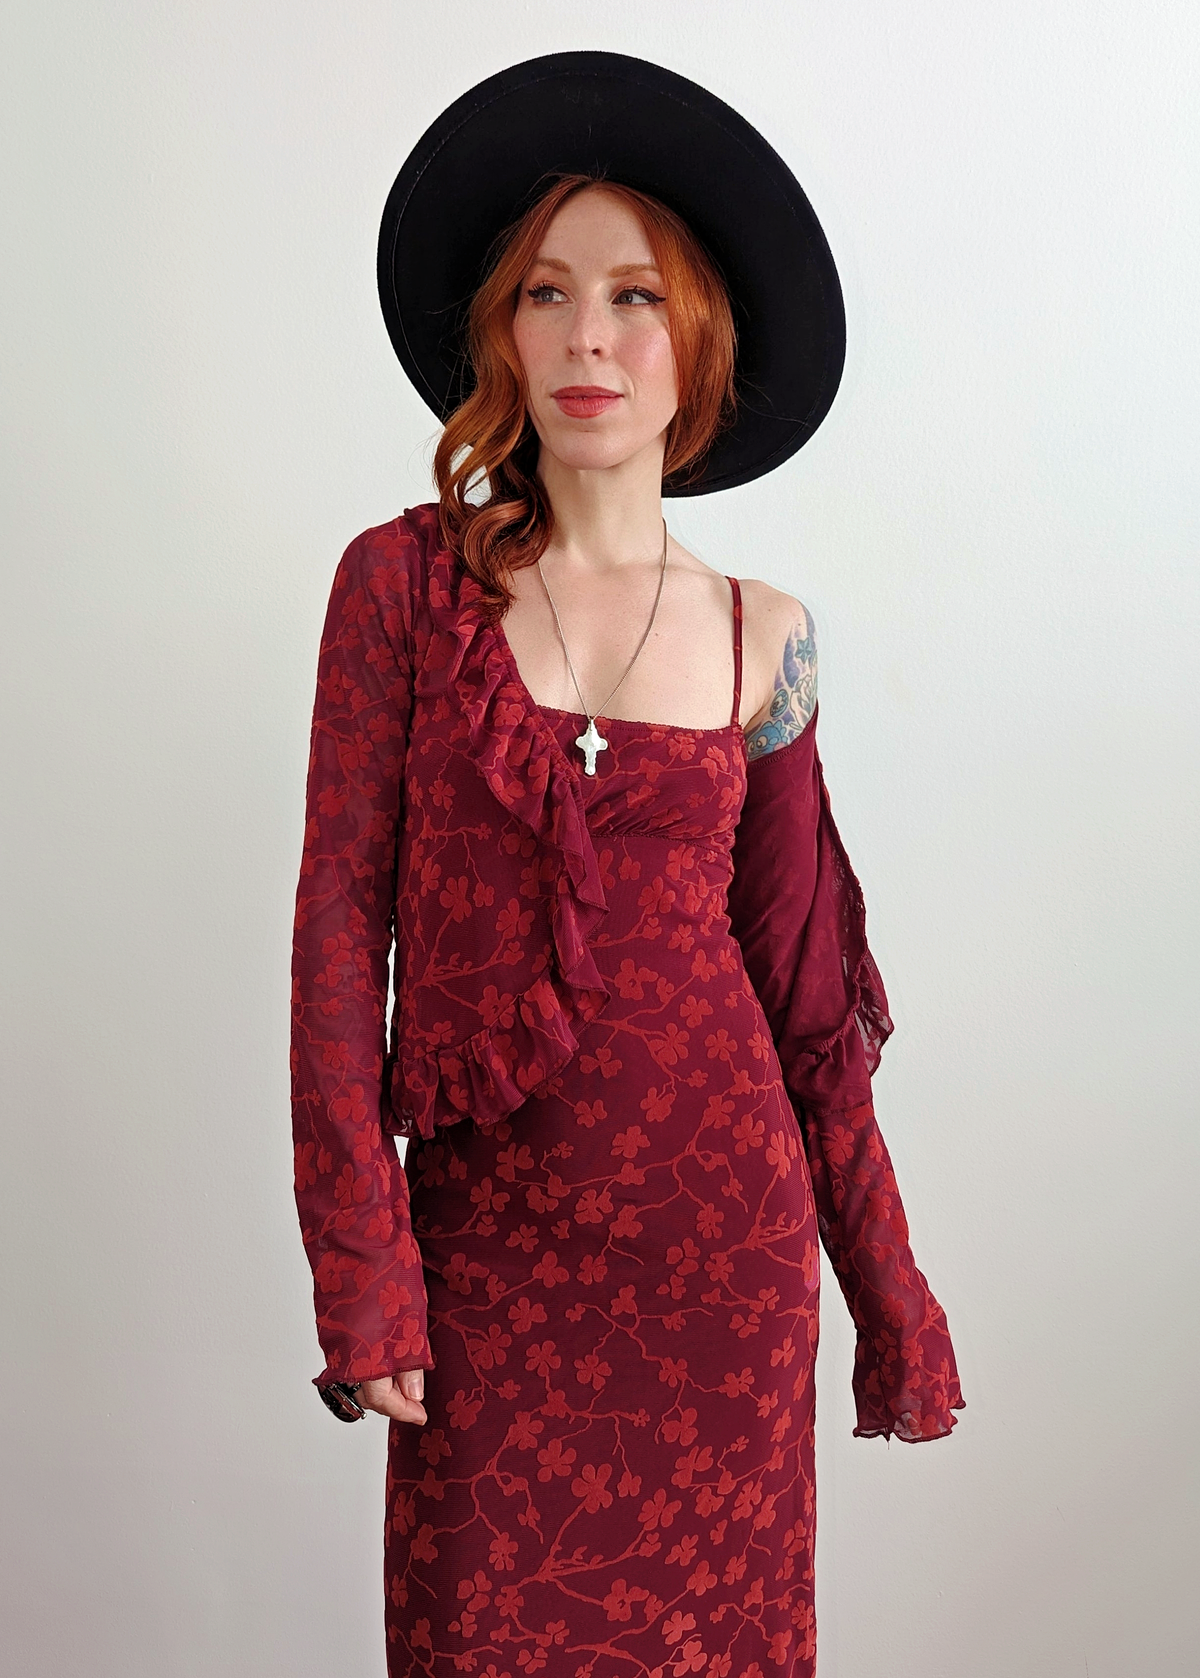 90s inspired burgundy red ruffled cardigan top made of a slinky mesh fabrication with flocked velvet floral design. Deep v-neckline, hook and eye closure at front. Long sleeves. By Motel Rocks